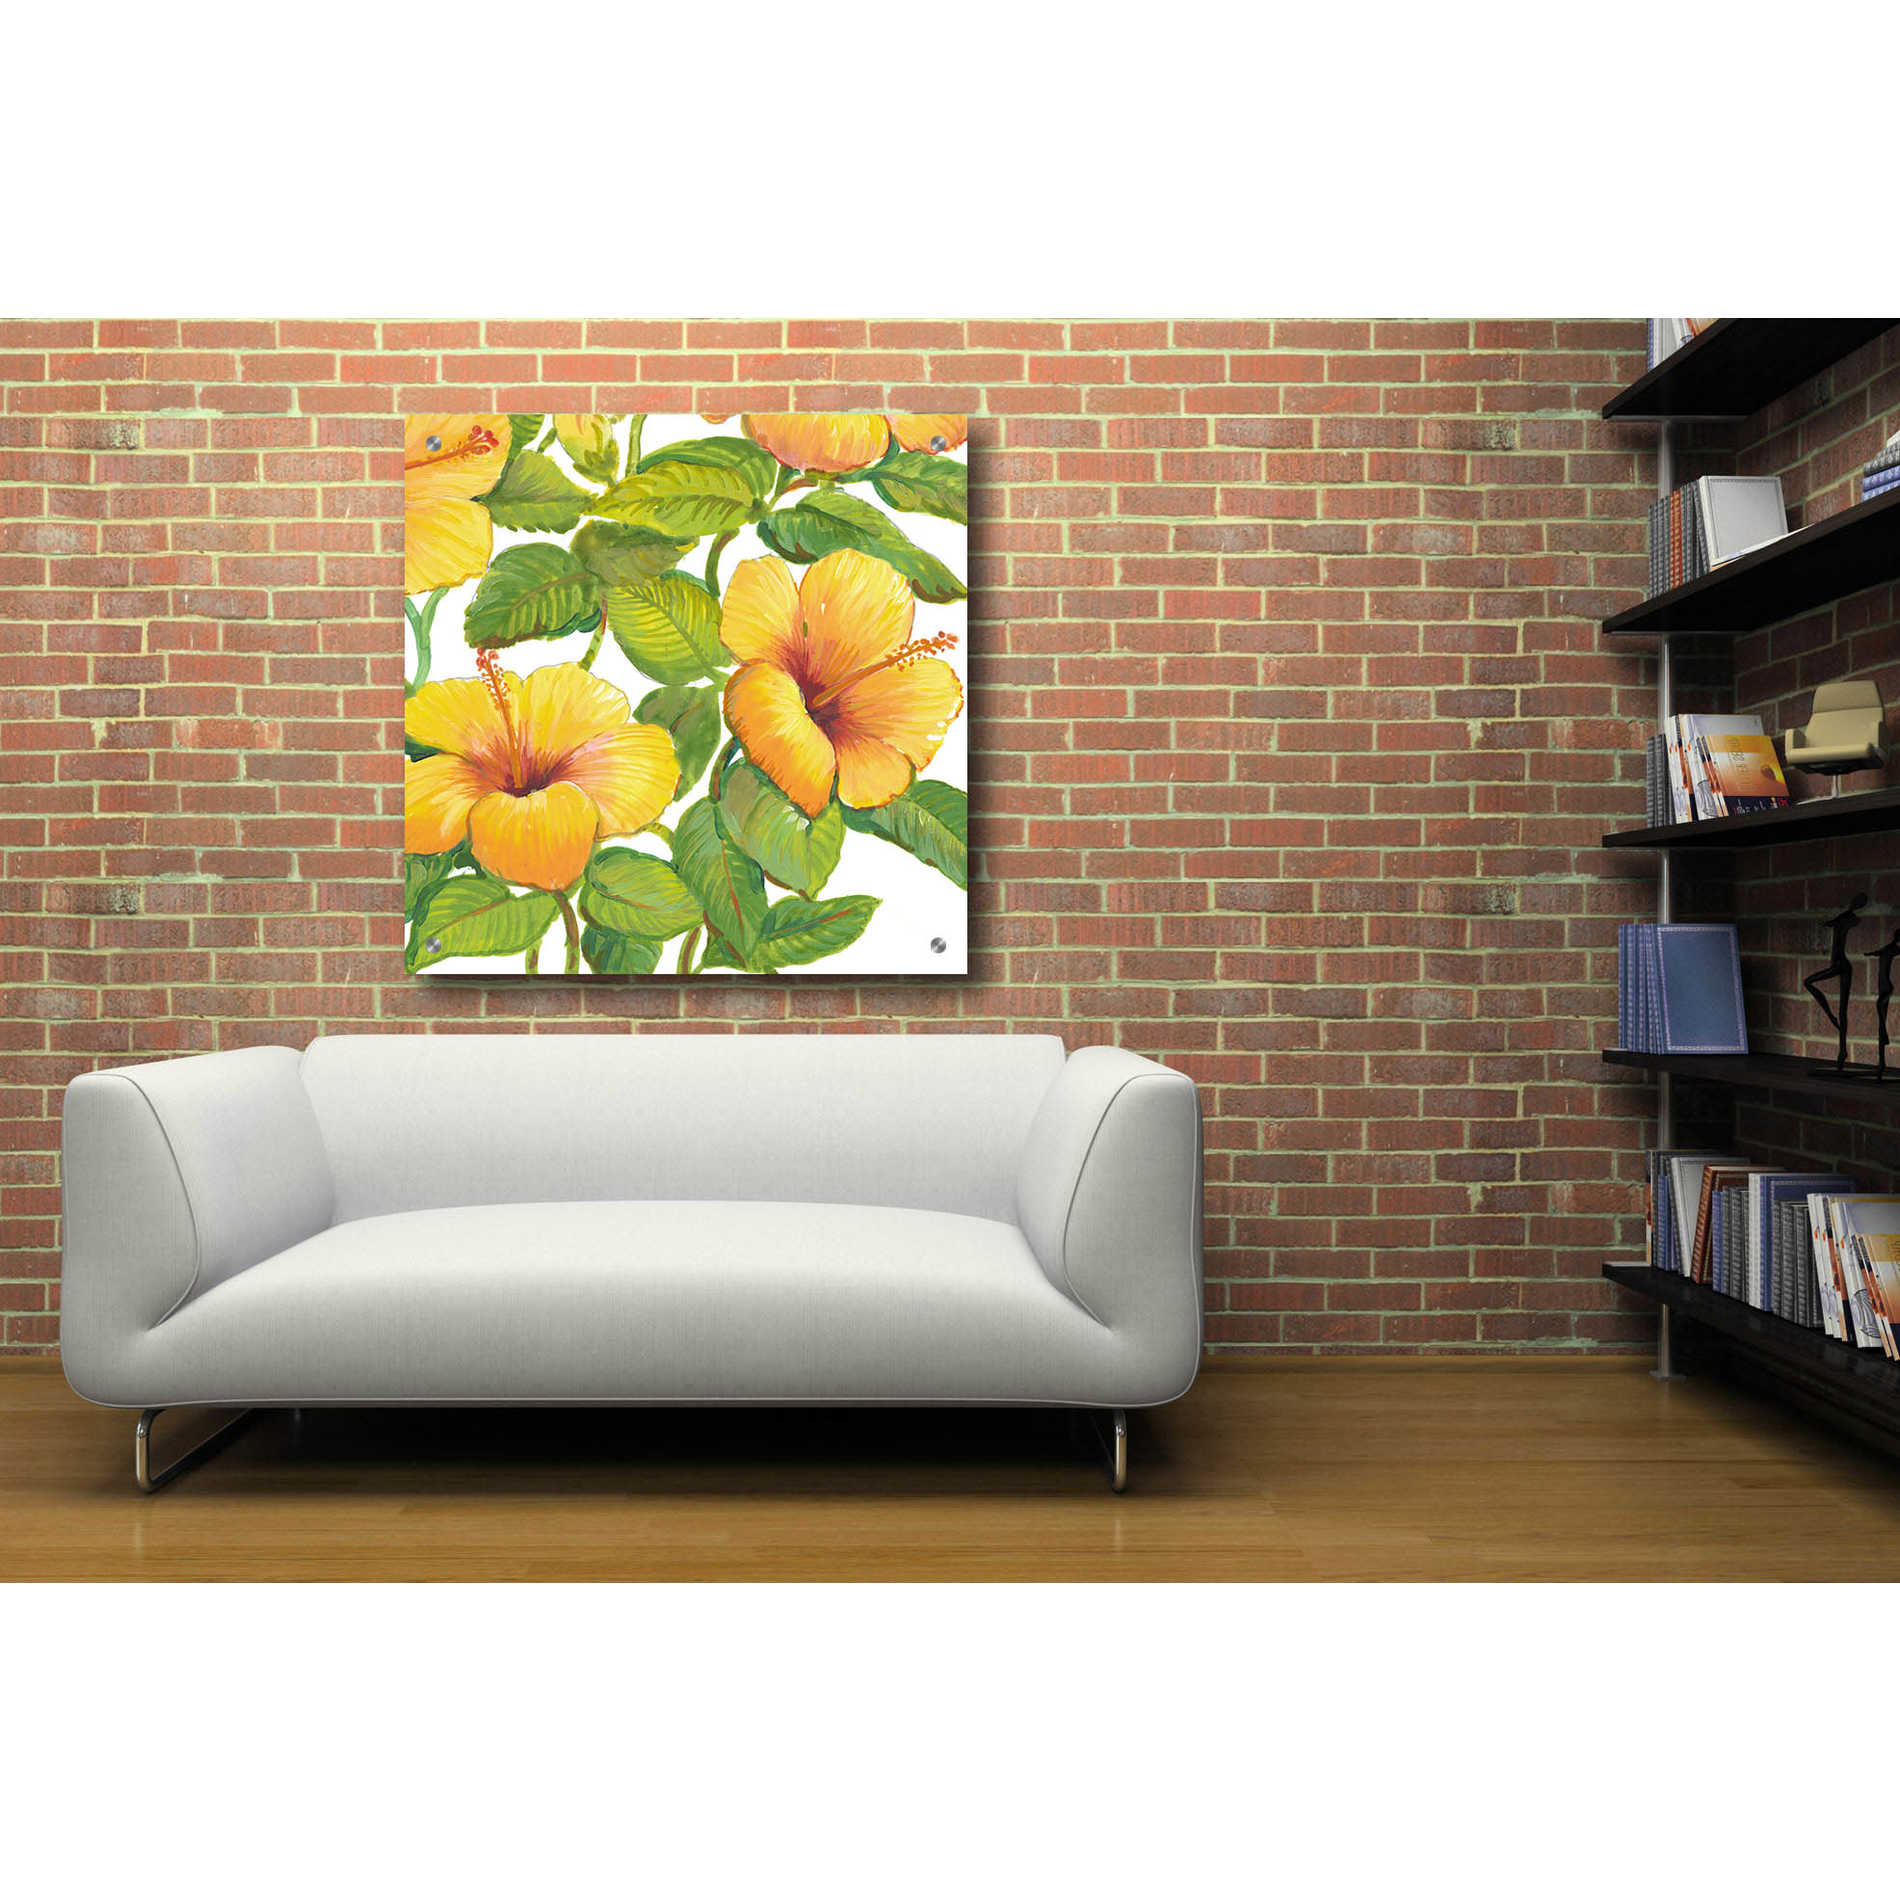 Epic Art 'Watercolor Hibiscus IV' by Tim O'Toole, Acrylic Glass Wall Art,36x36